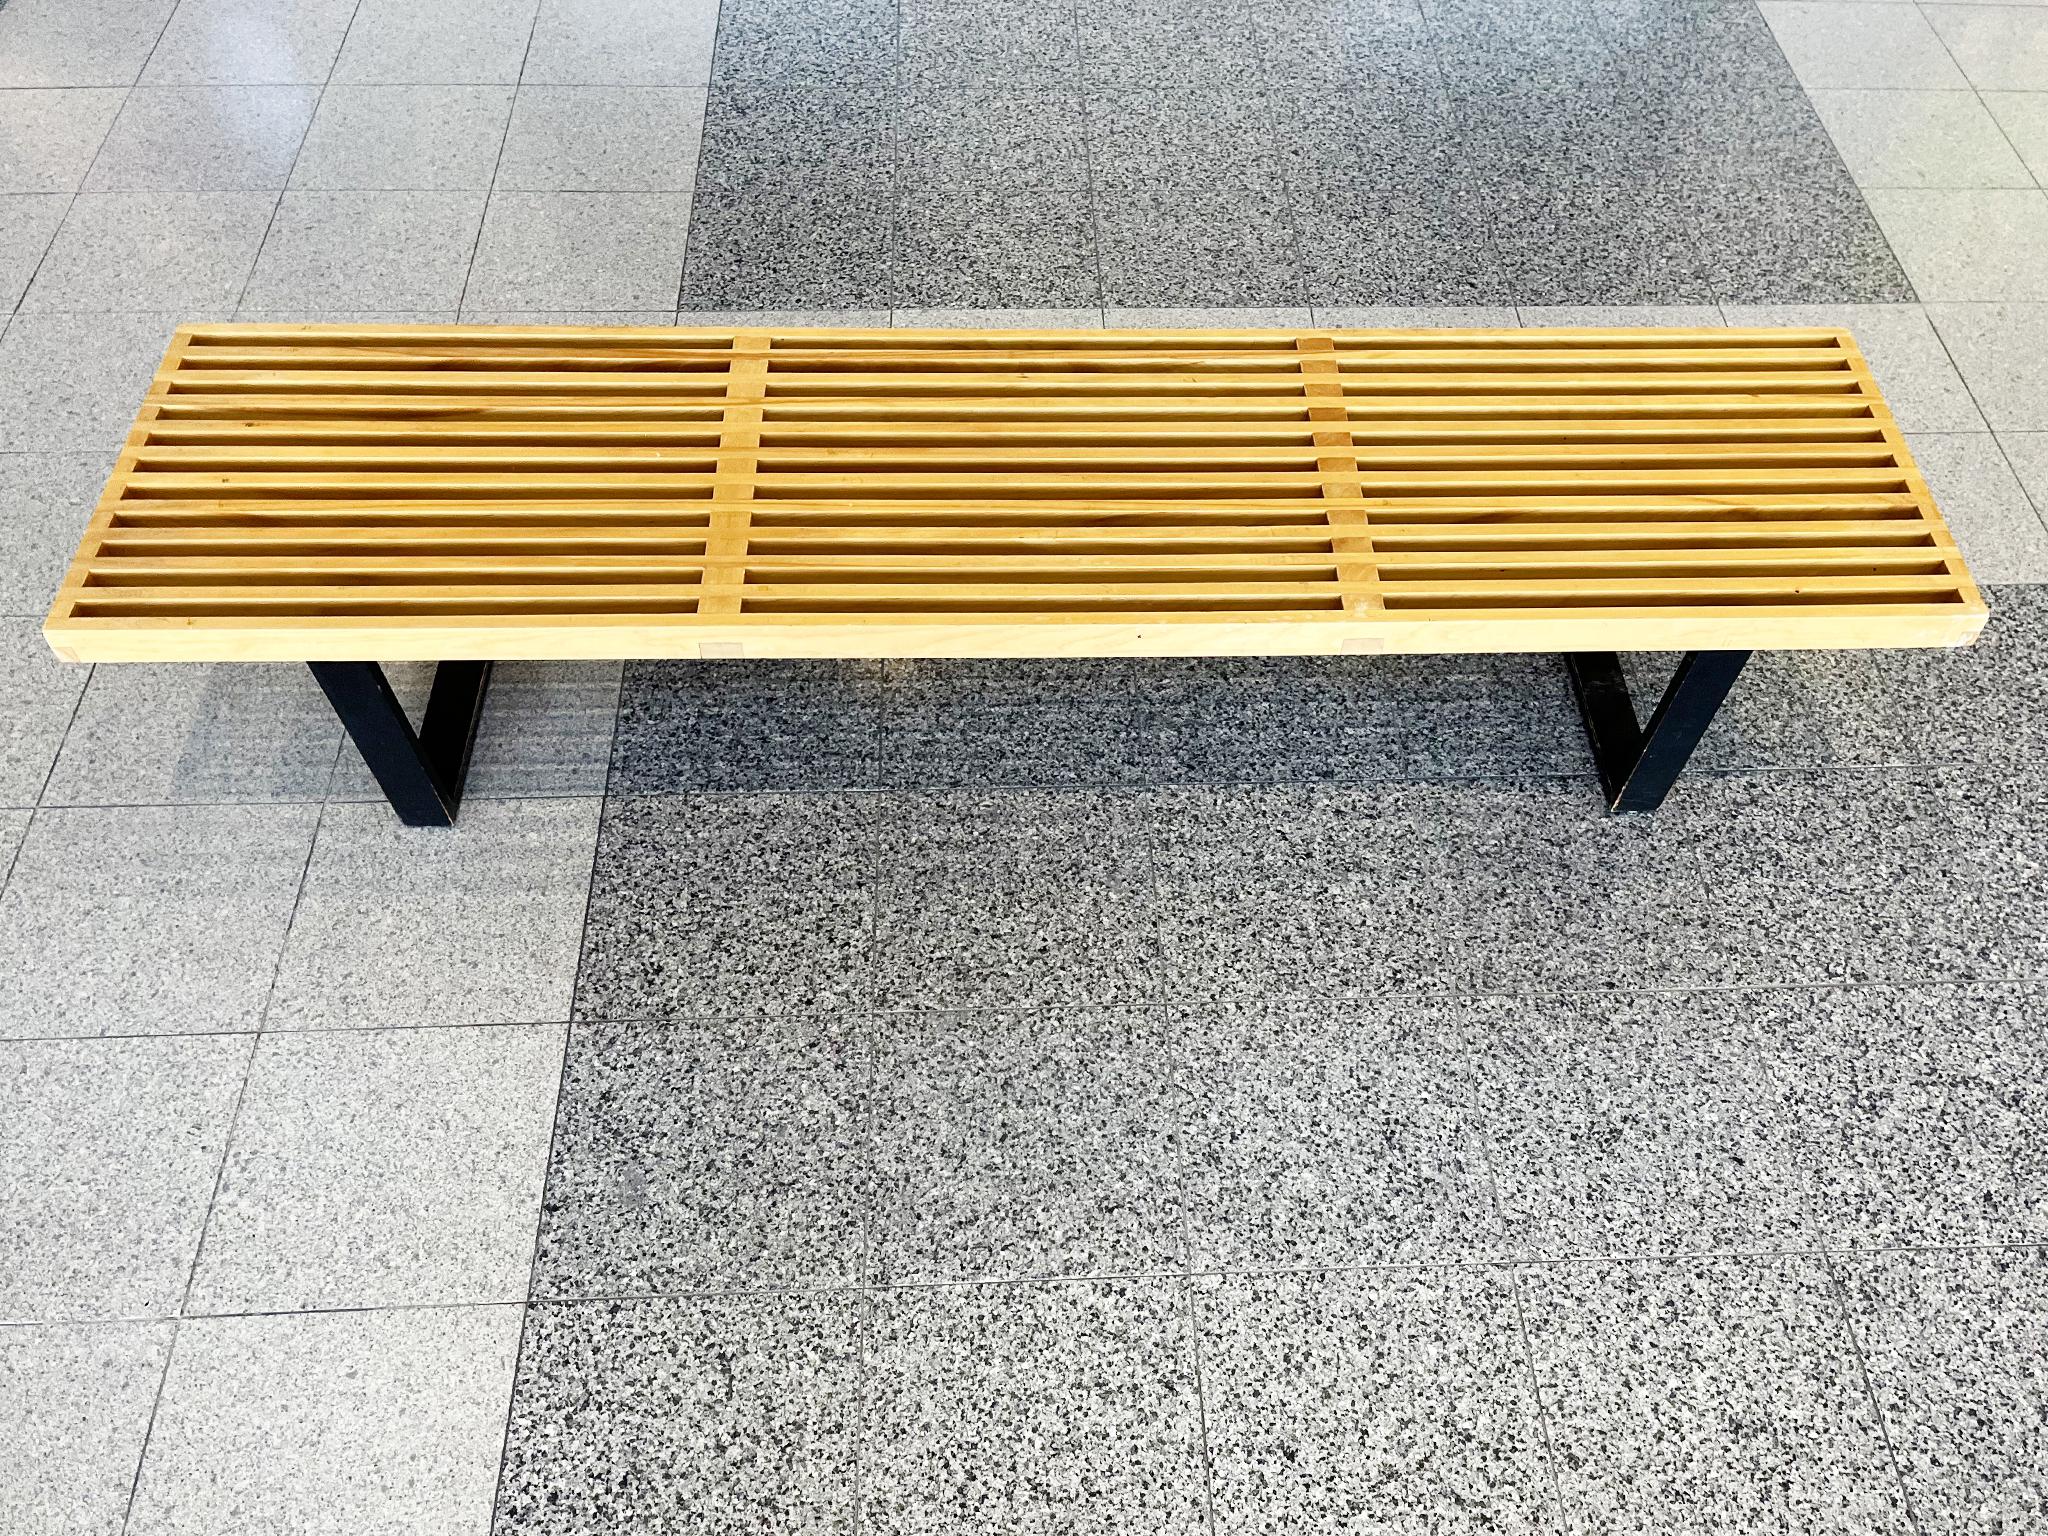 American Midcentury George Nelson Slatted Bench for Herman Miller For Sale